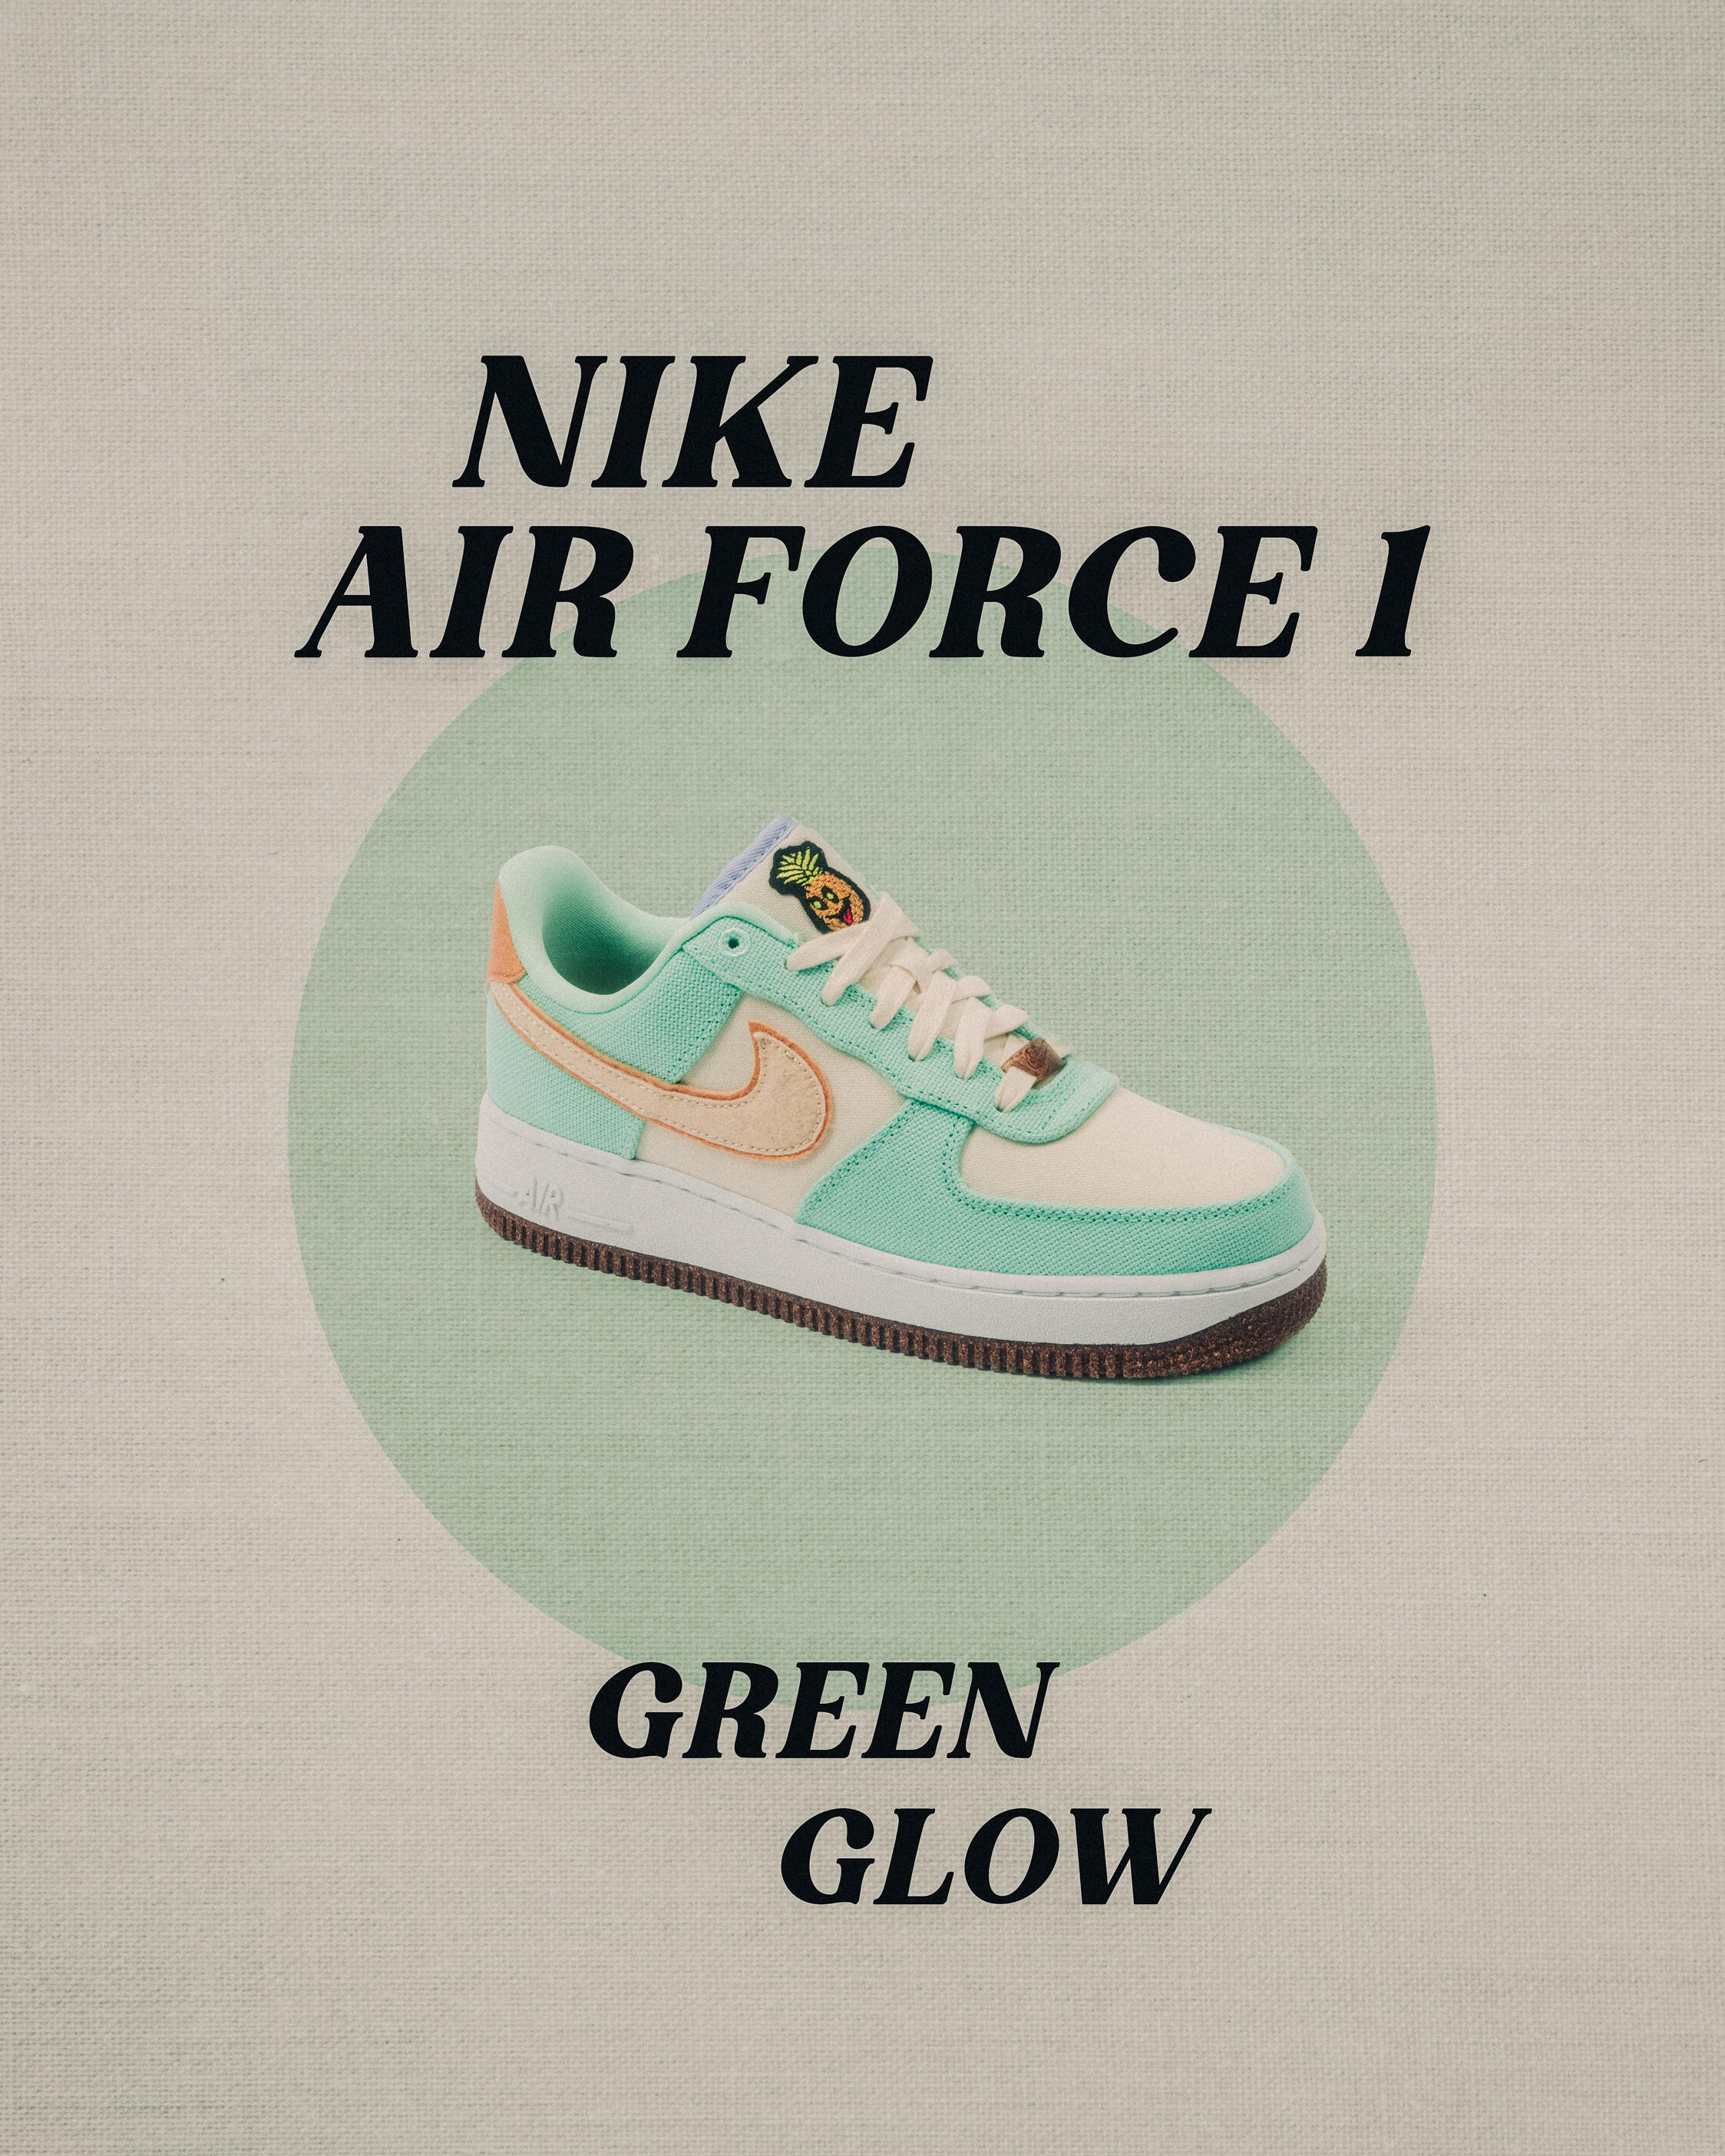 Nike WMNS AIR FORCE 1 '07 LX "HAPPY PINEAPPLE"